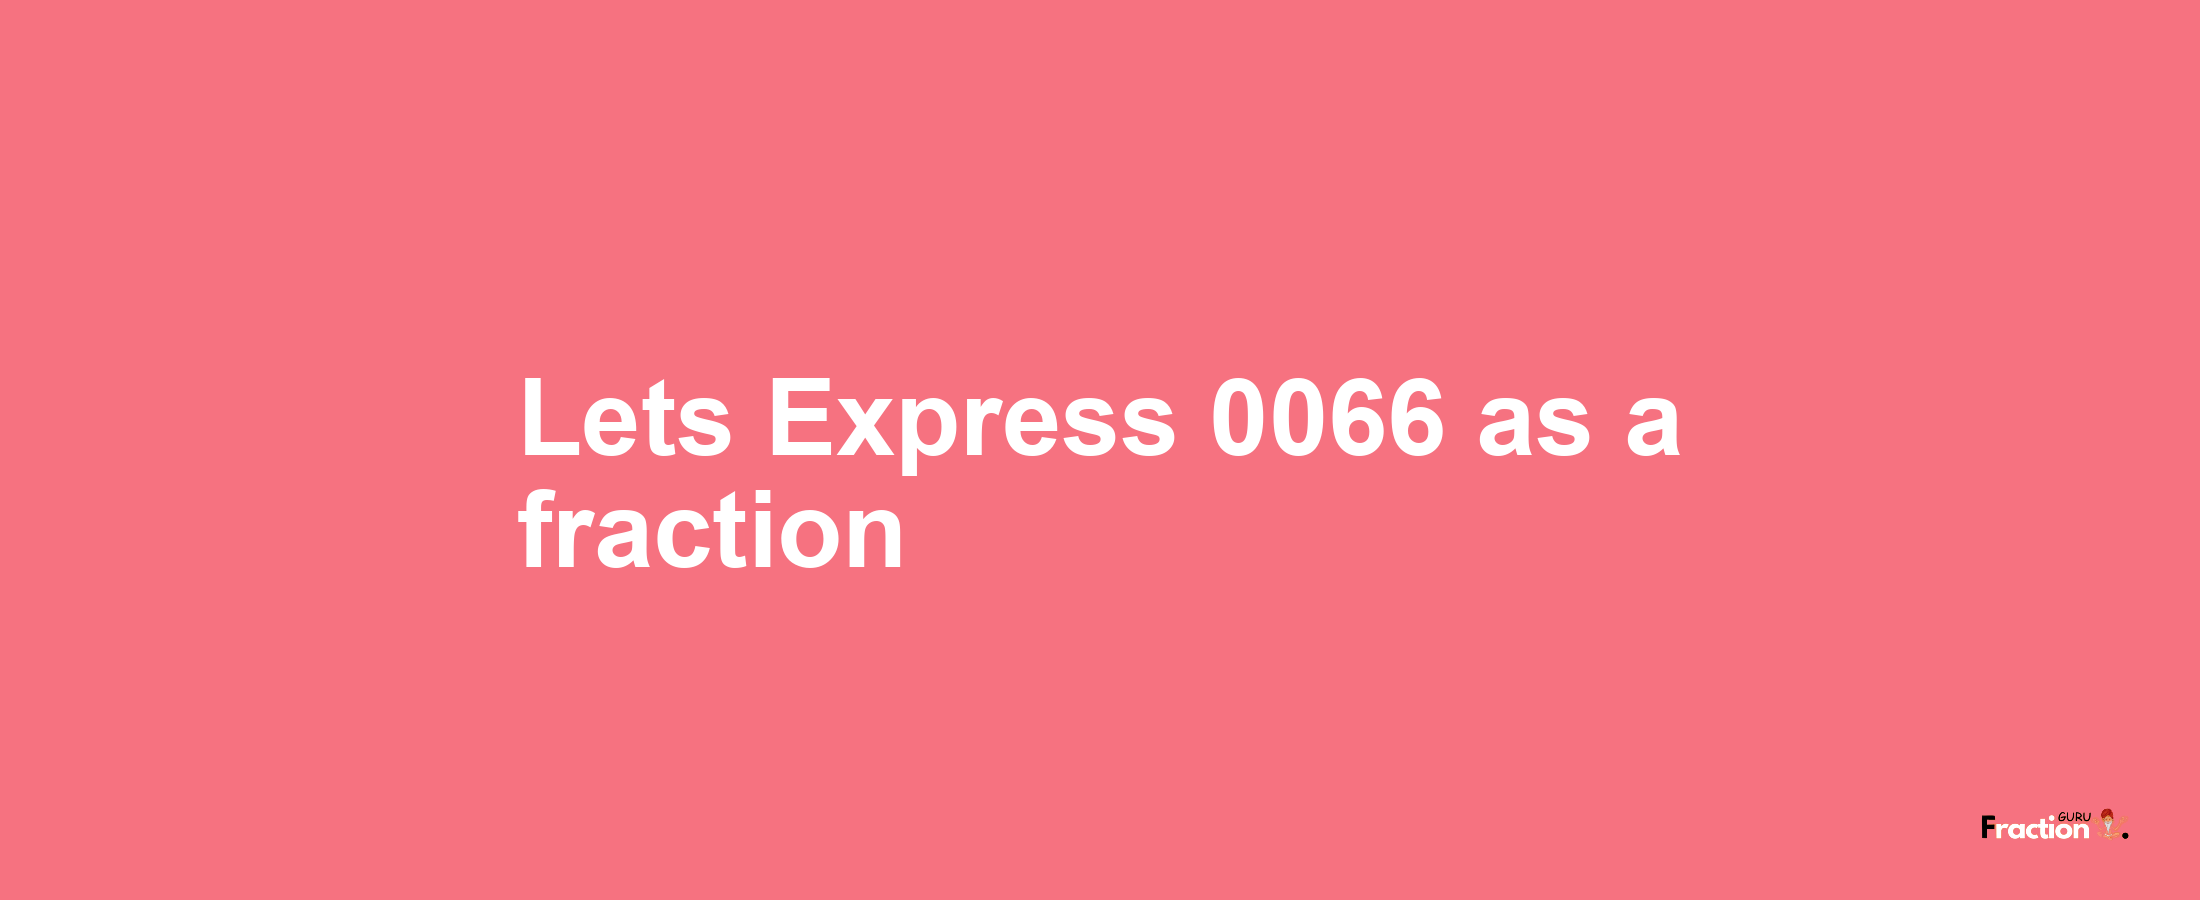 Lets Express 0066 as afraction